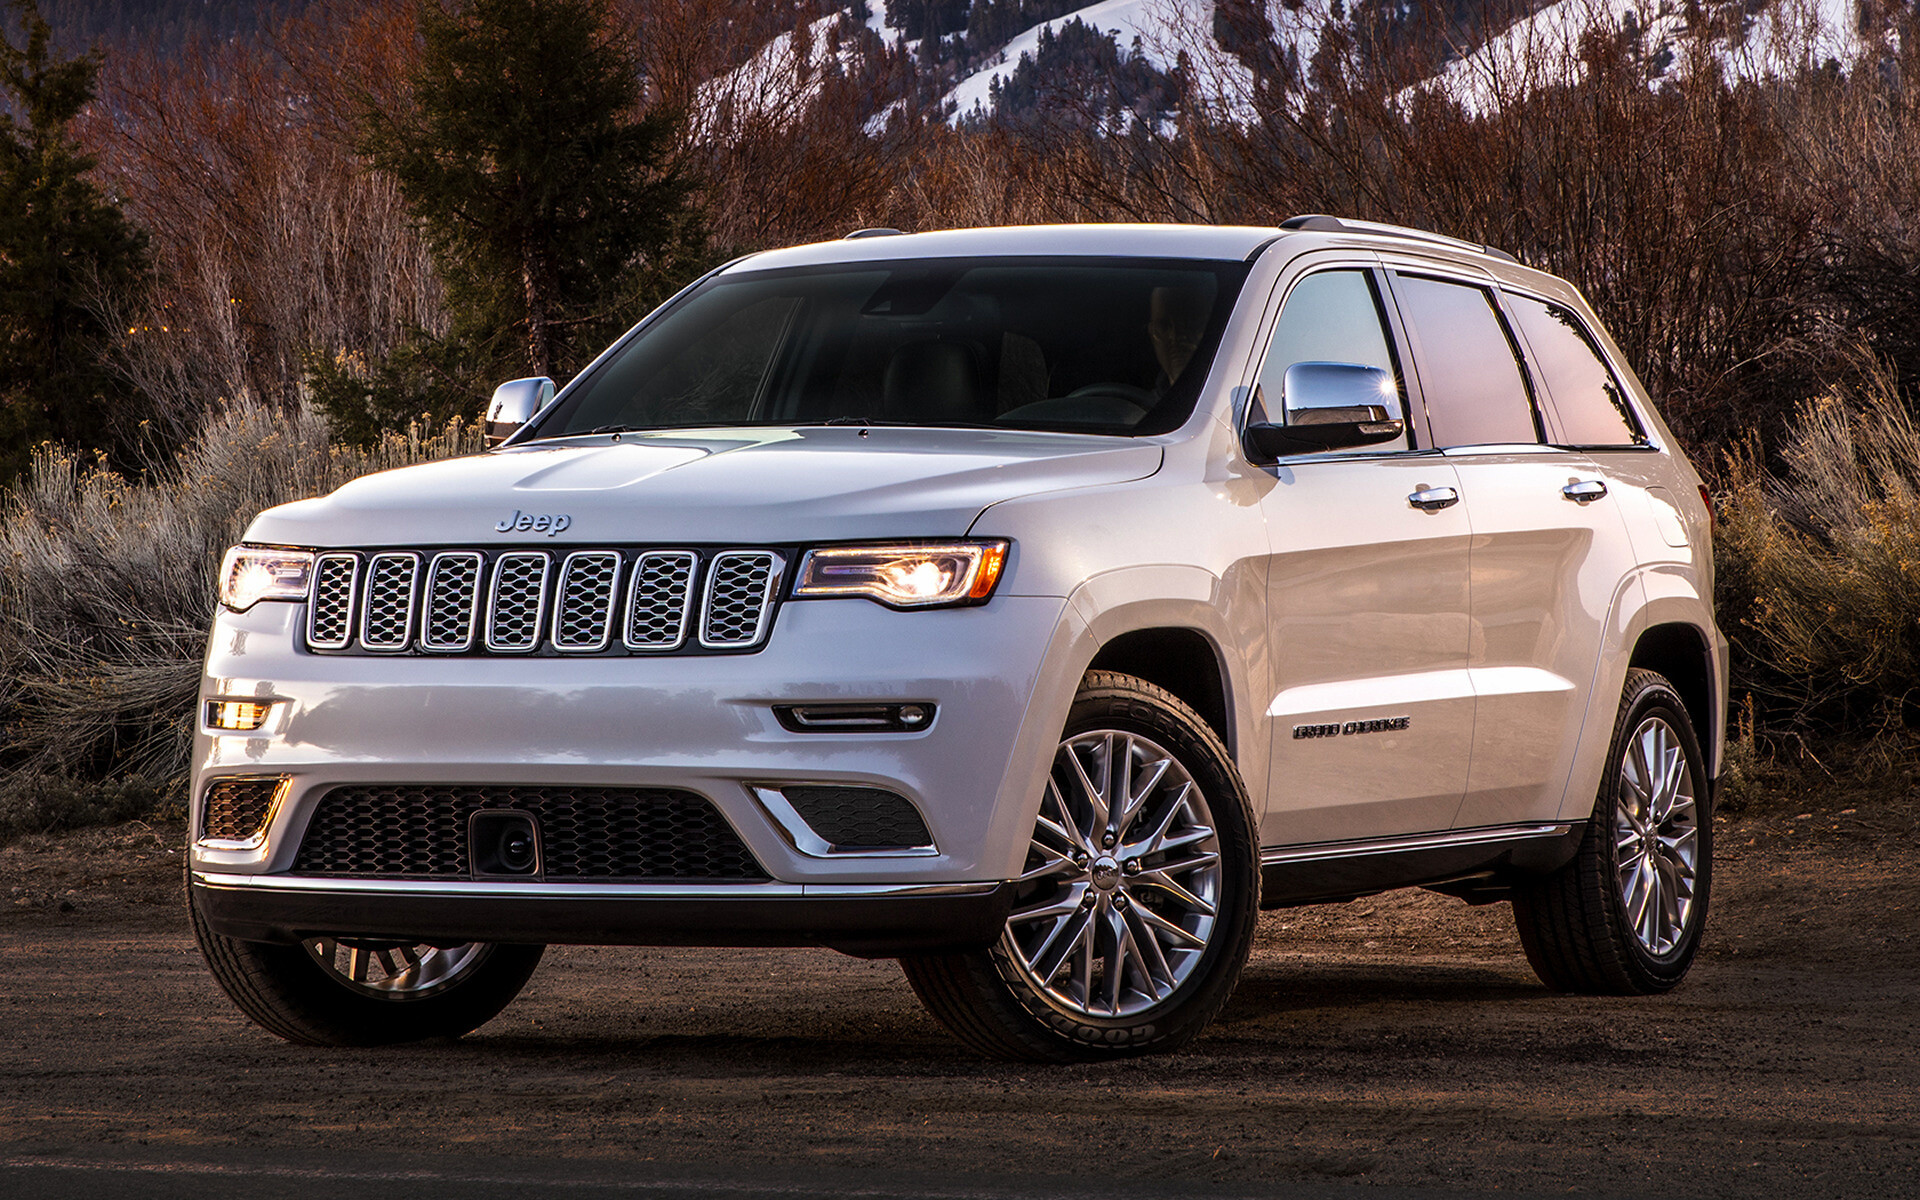 Jeep Grand Cherokee: Summit trim, Maximum payload capacity of 1,219 pounds. 1920x1200 HD Background.